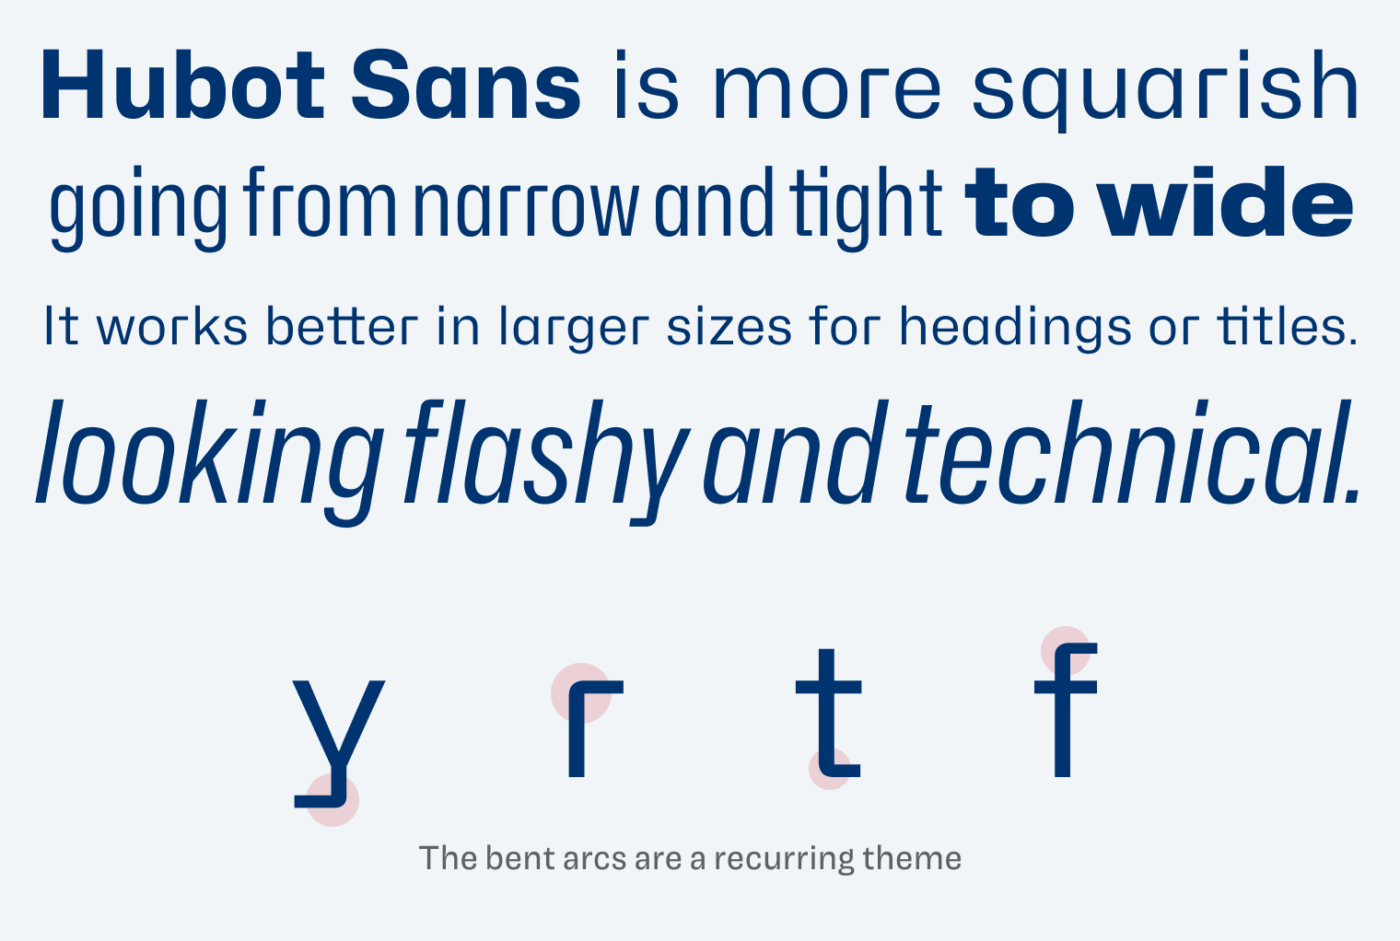 Hubot Sans is more squarish going from narrow and tight to wide
It works better in larger sizes for headings or titles. Looking flashy and technical.
The bent arcs are a recurring theme you can see at the y, r, t, and f